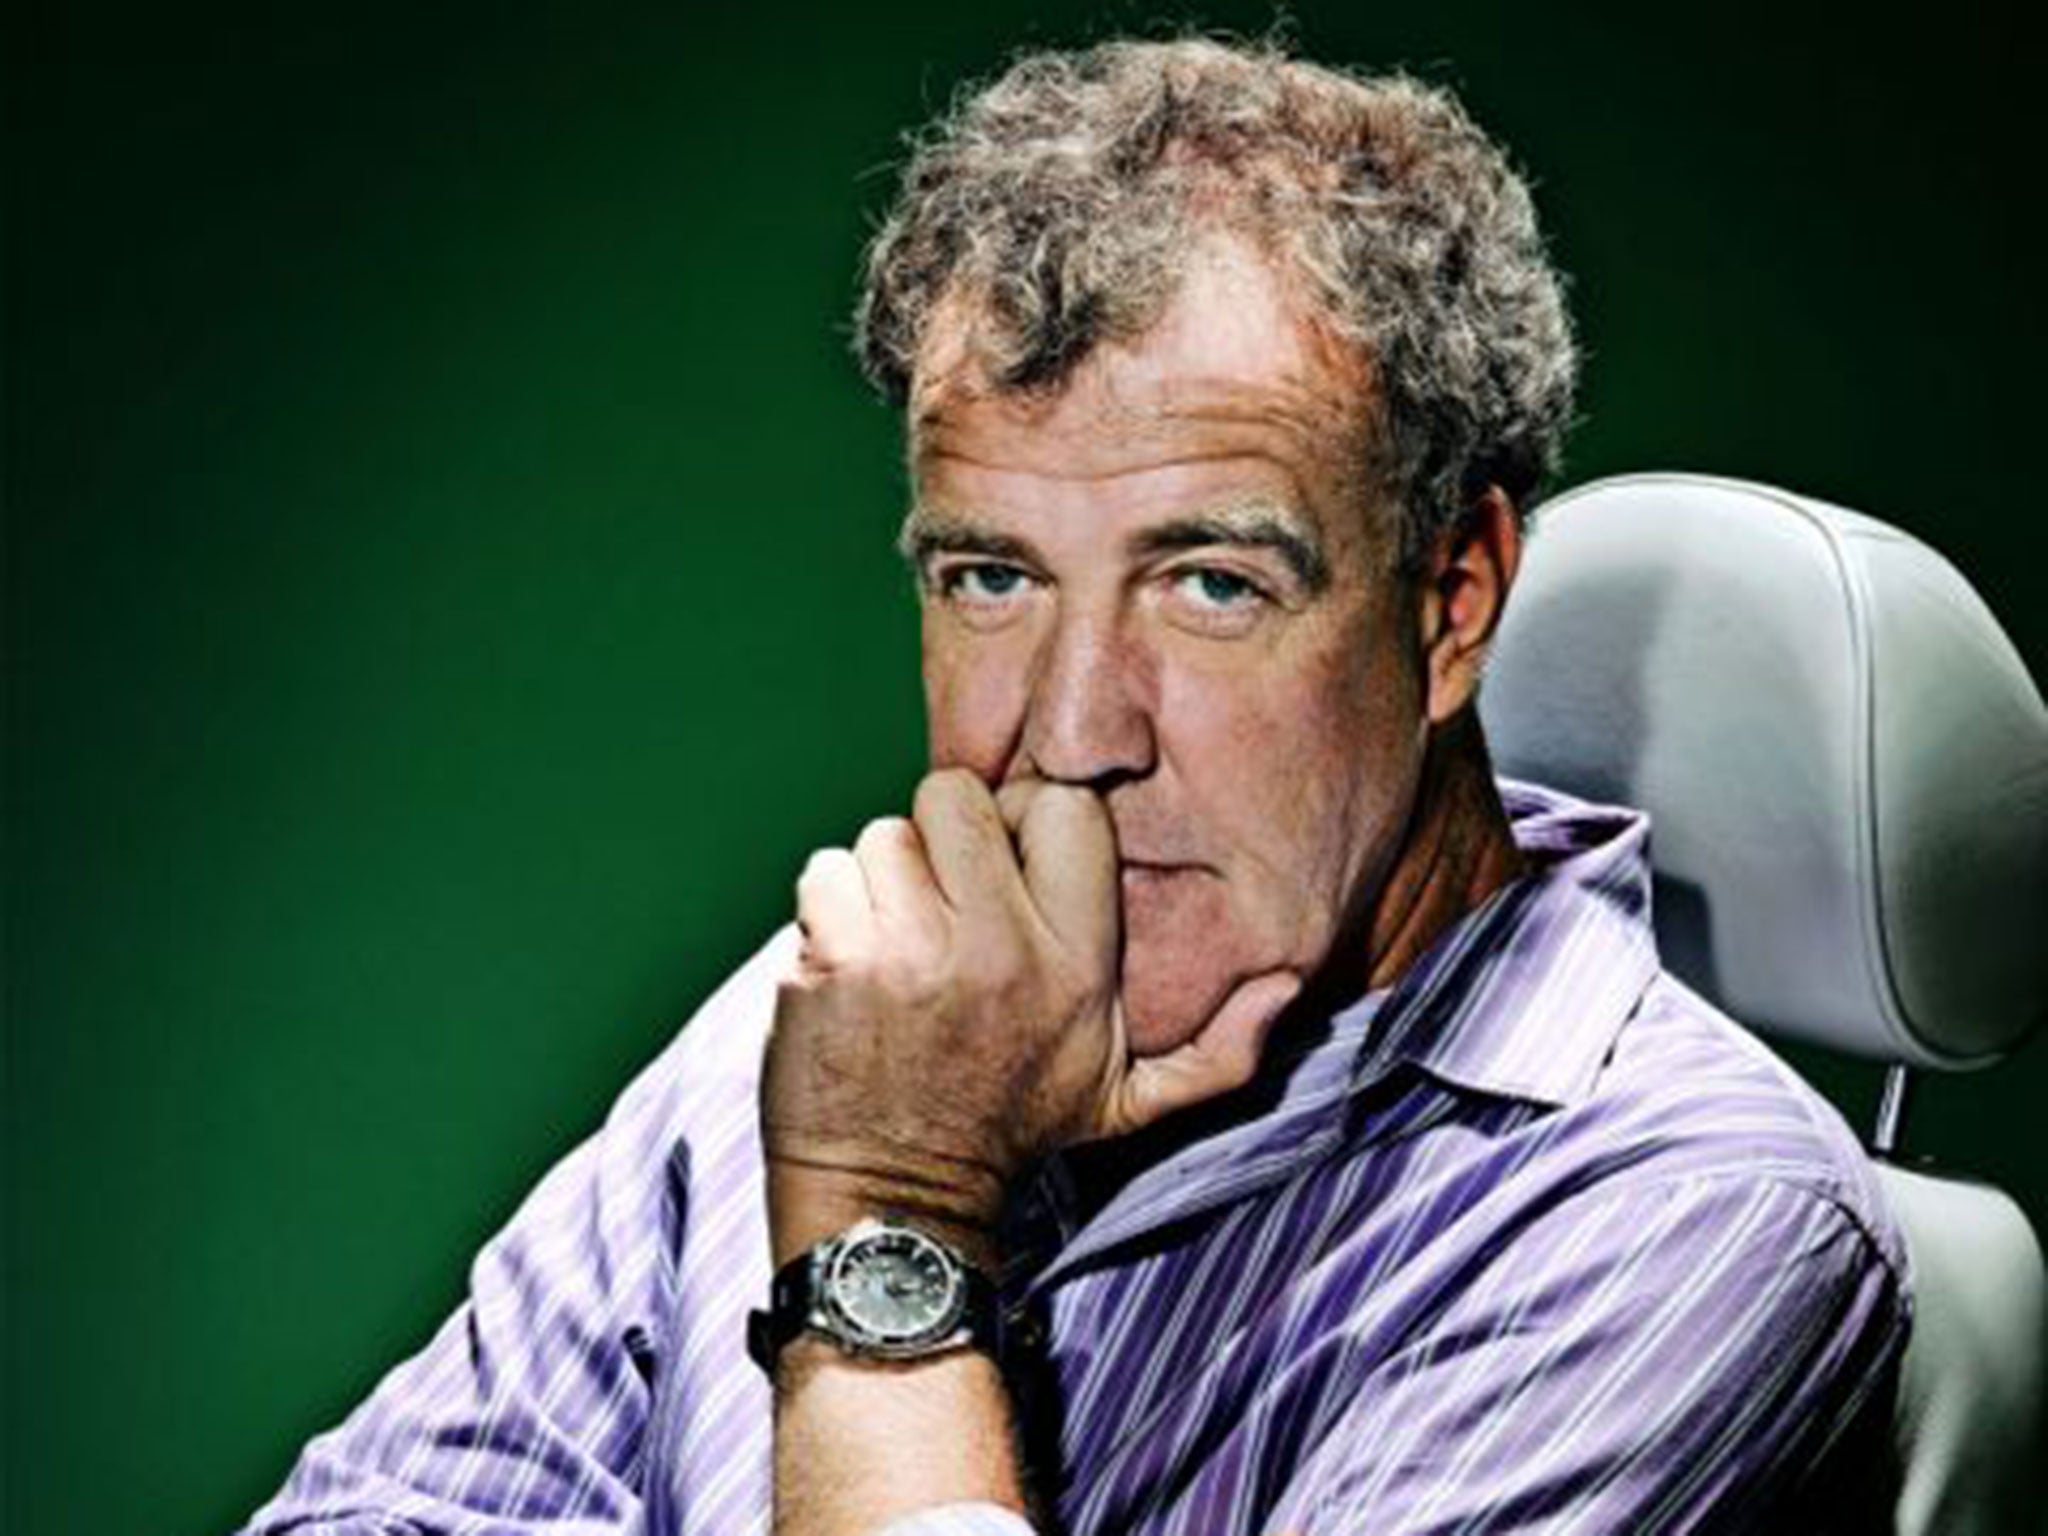 Jeremy Clarkson will make his TV comeback on Have I Got News For You